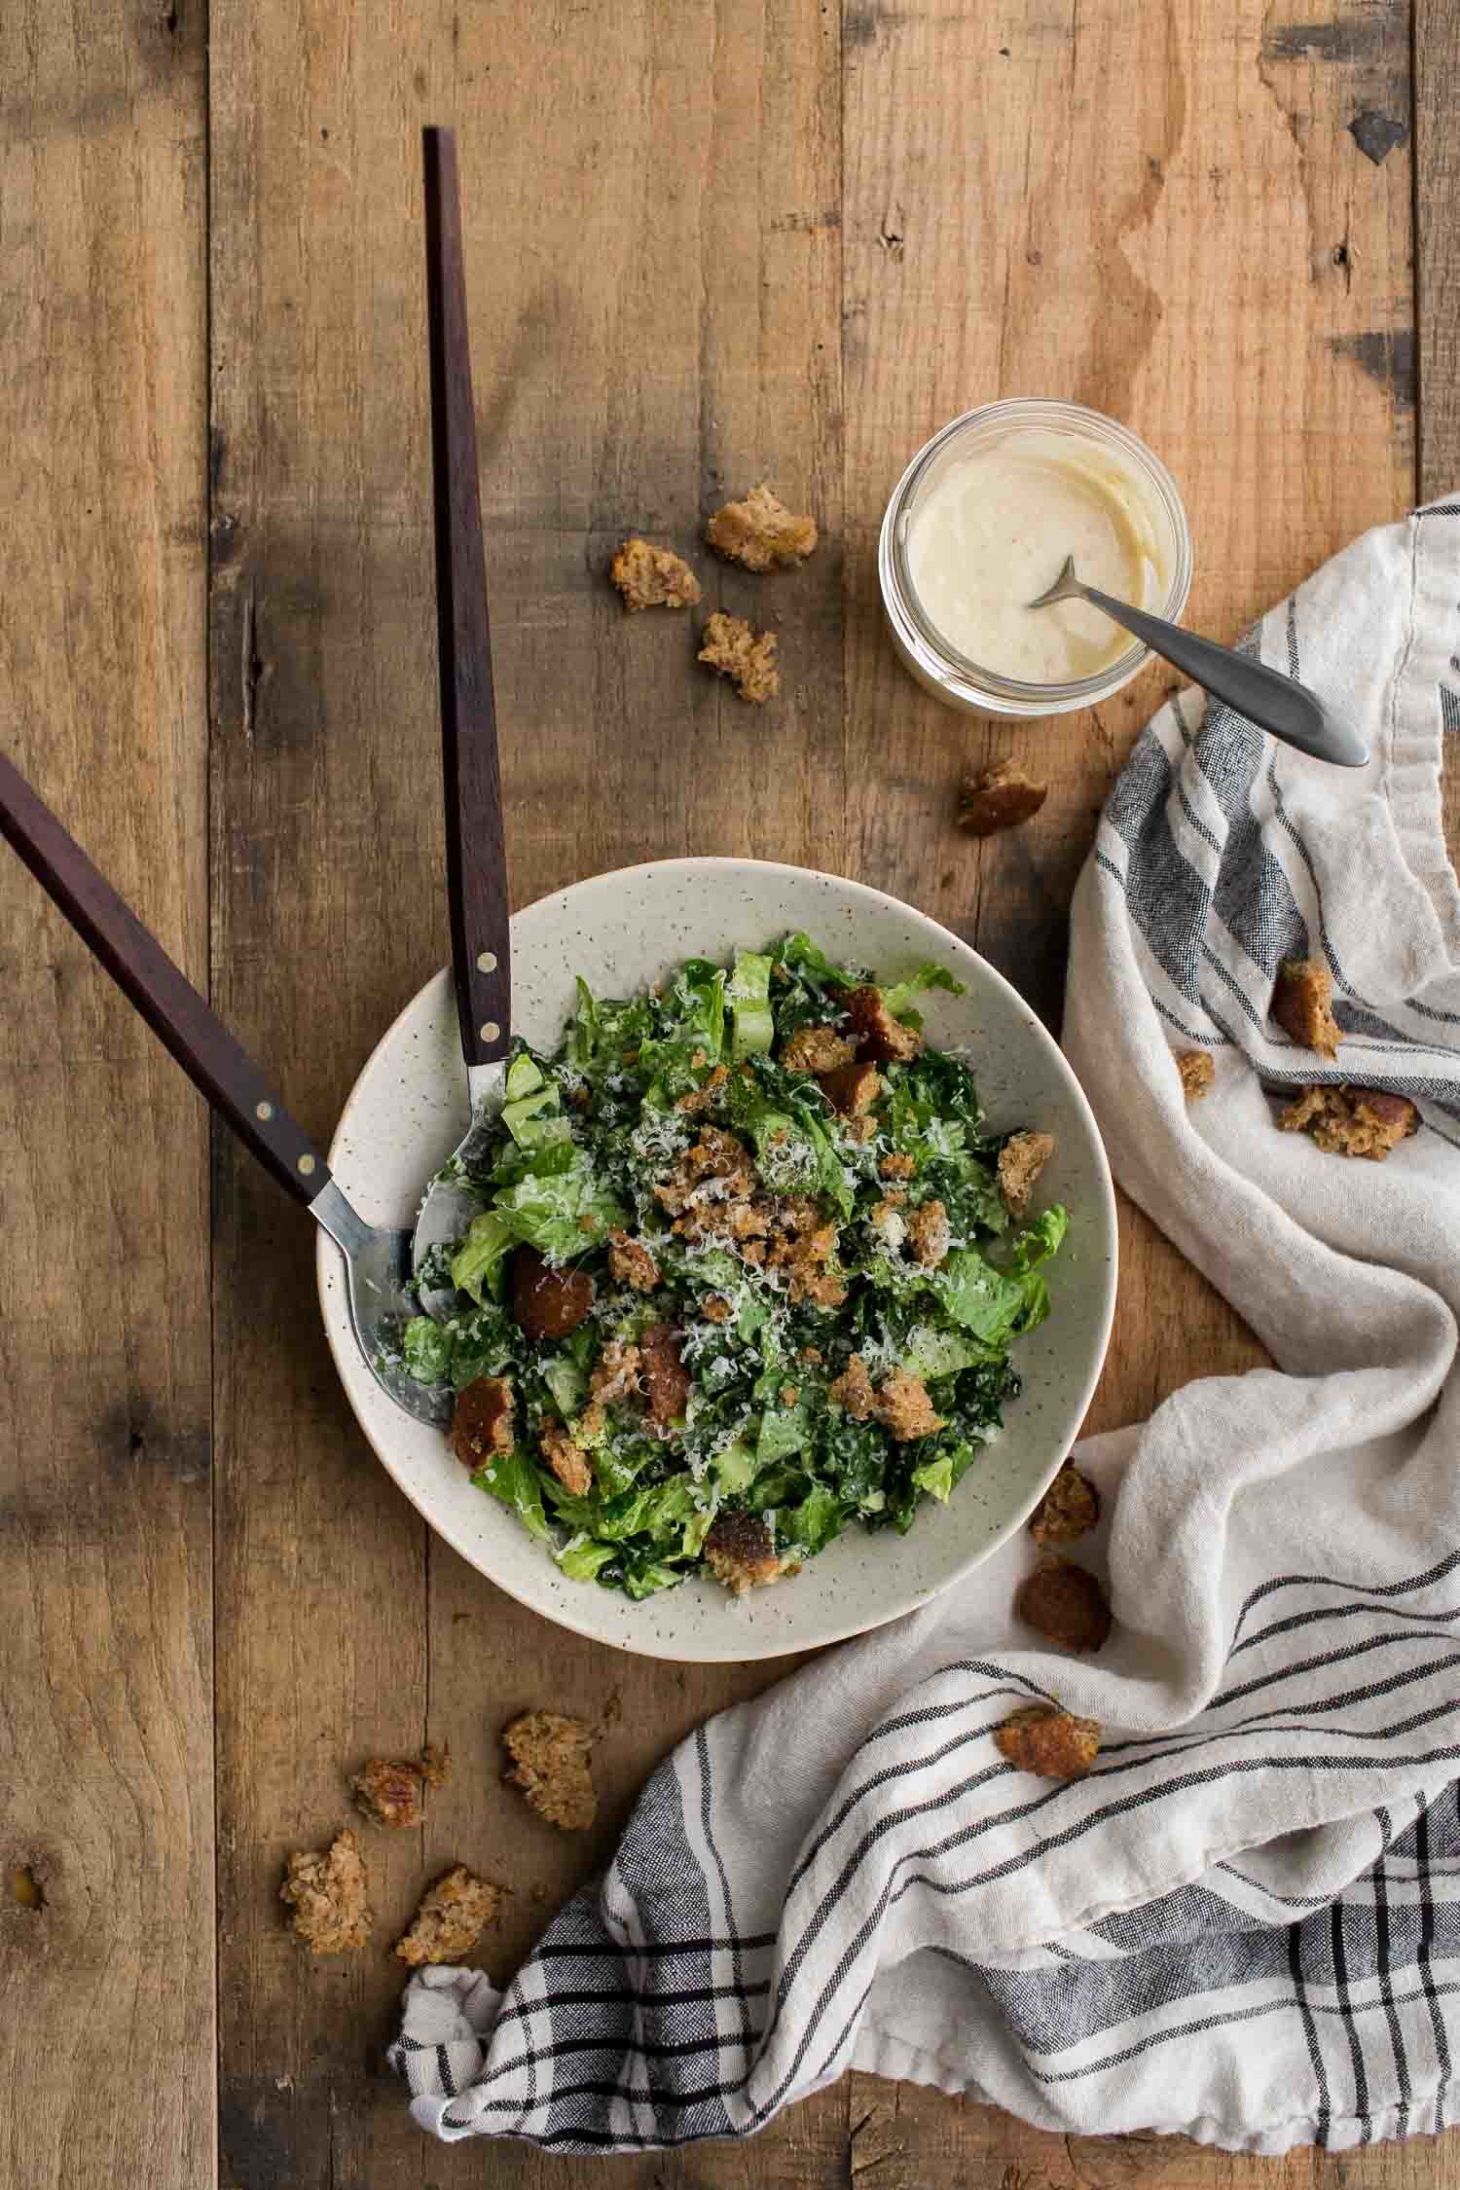 Tahini Kale Caesar Salad with Whole-Grain Croutons from Love Real Food